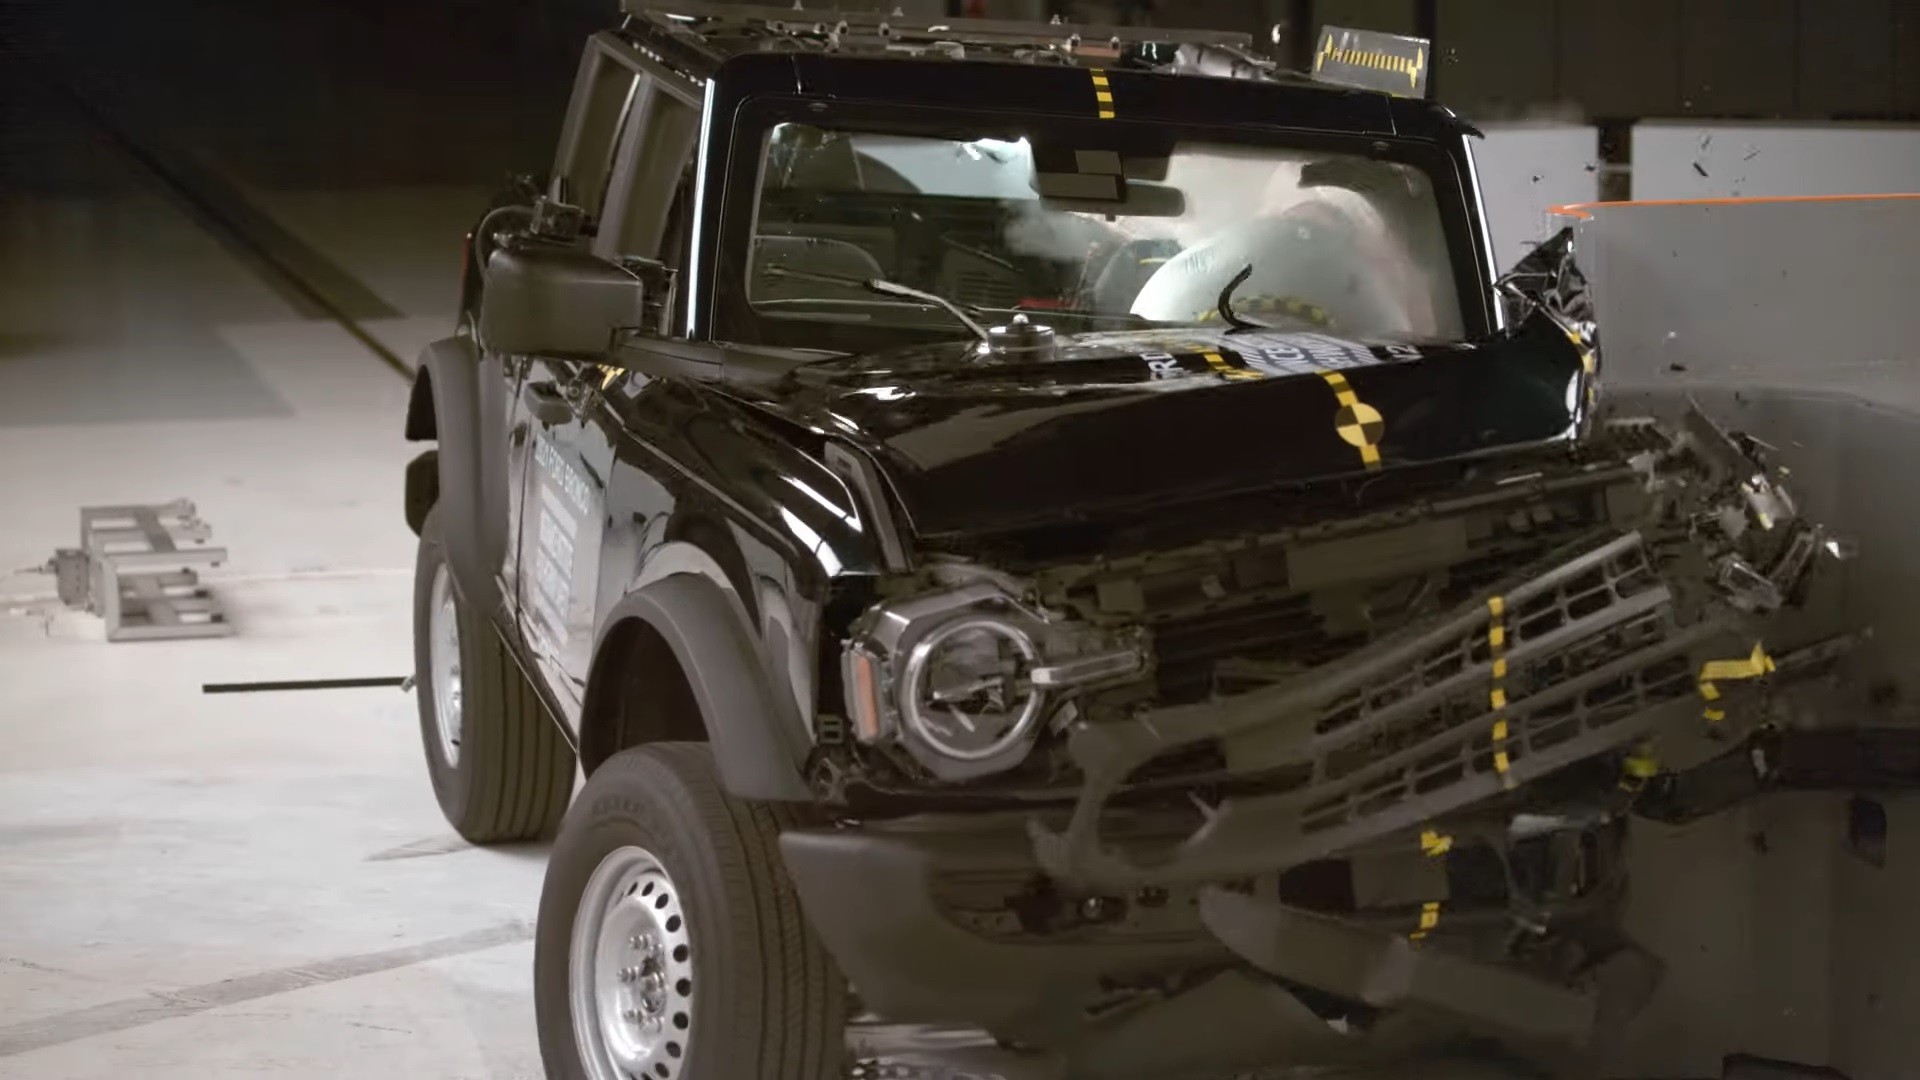 2021-ford-bronco-crash-test-reveals-acceptable-performance-for-head-restraints-and-seats_7.jpg